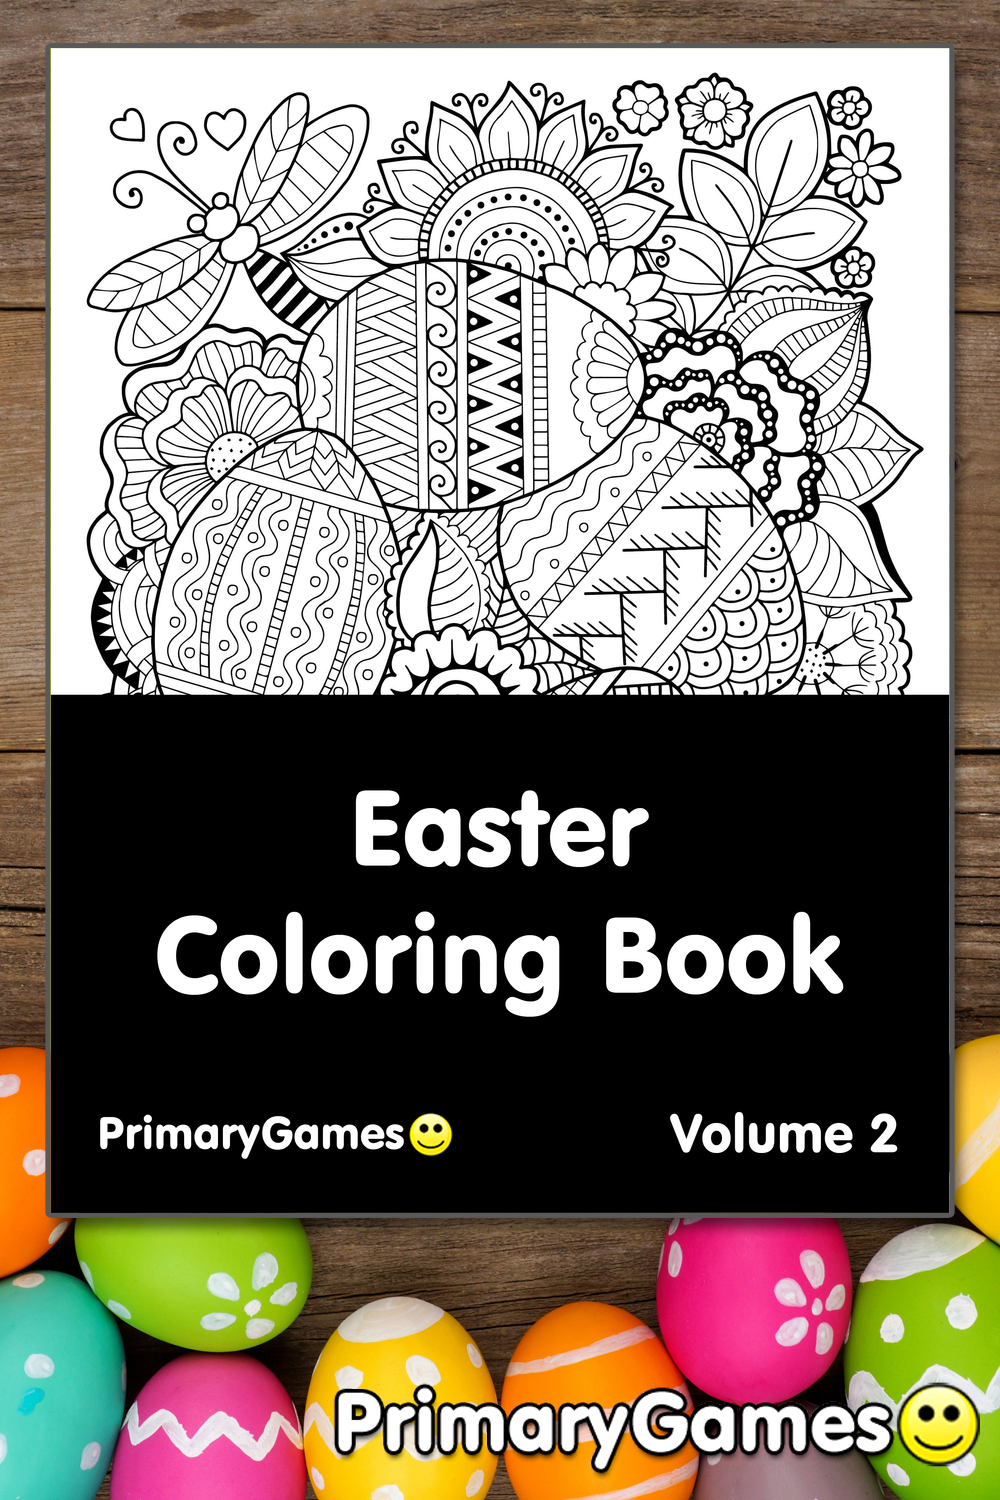 Download Easter Coloring eBook: Volume 2 • FREE Printable PDF from ...